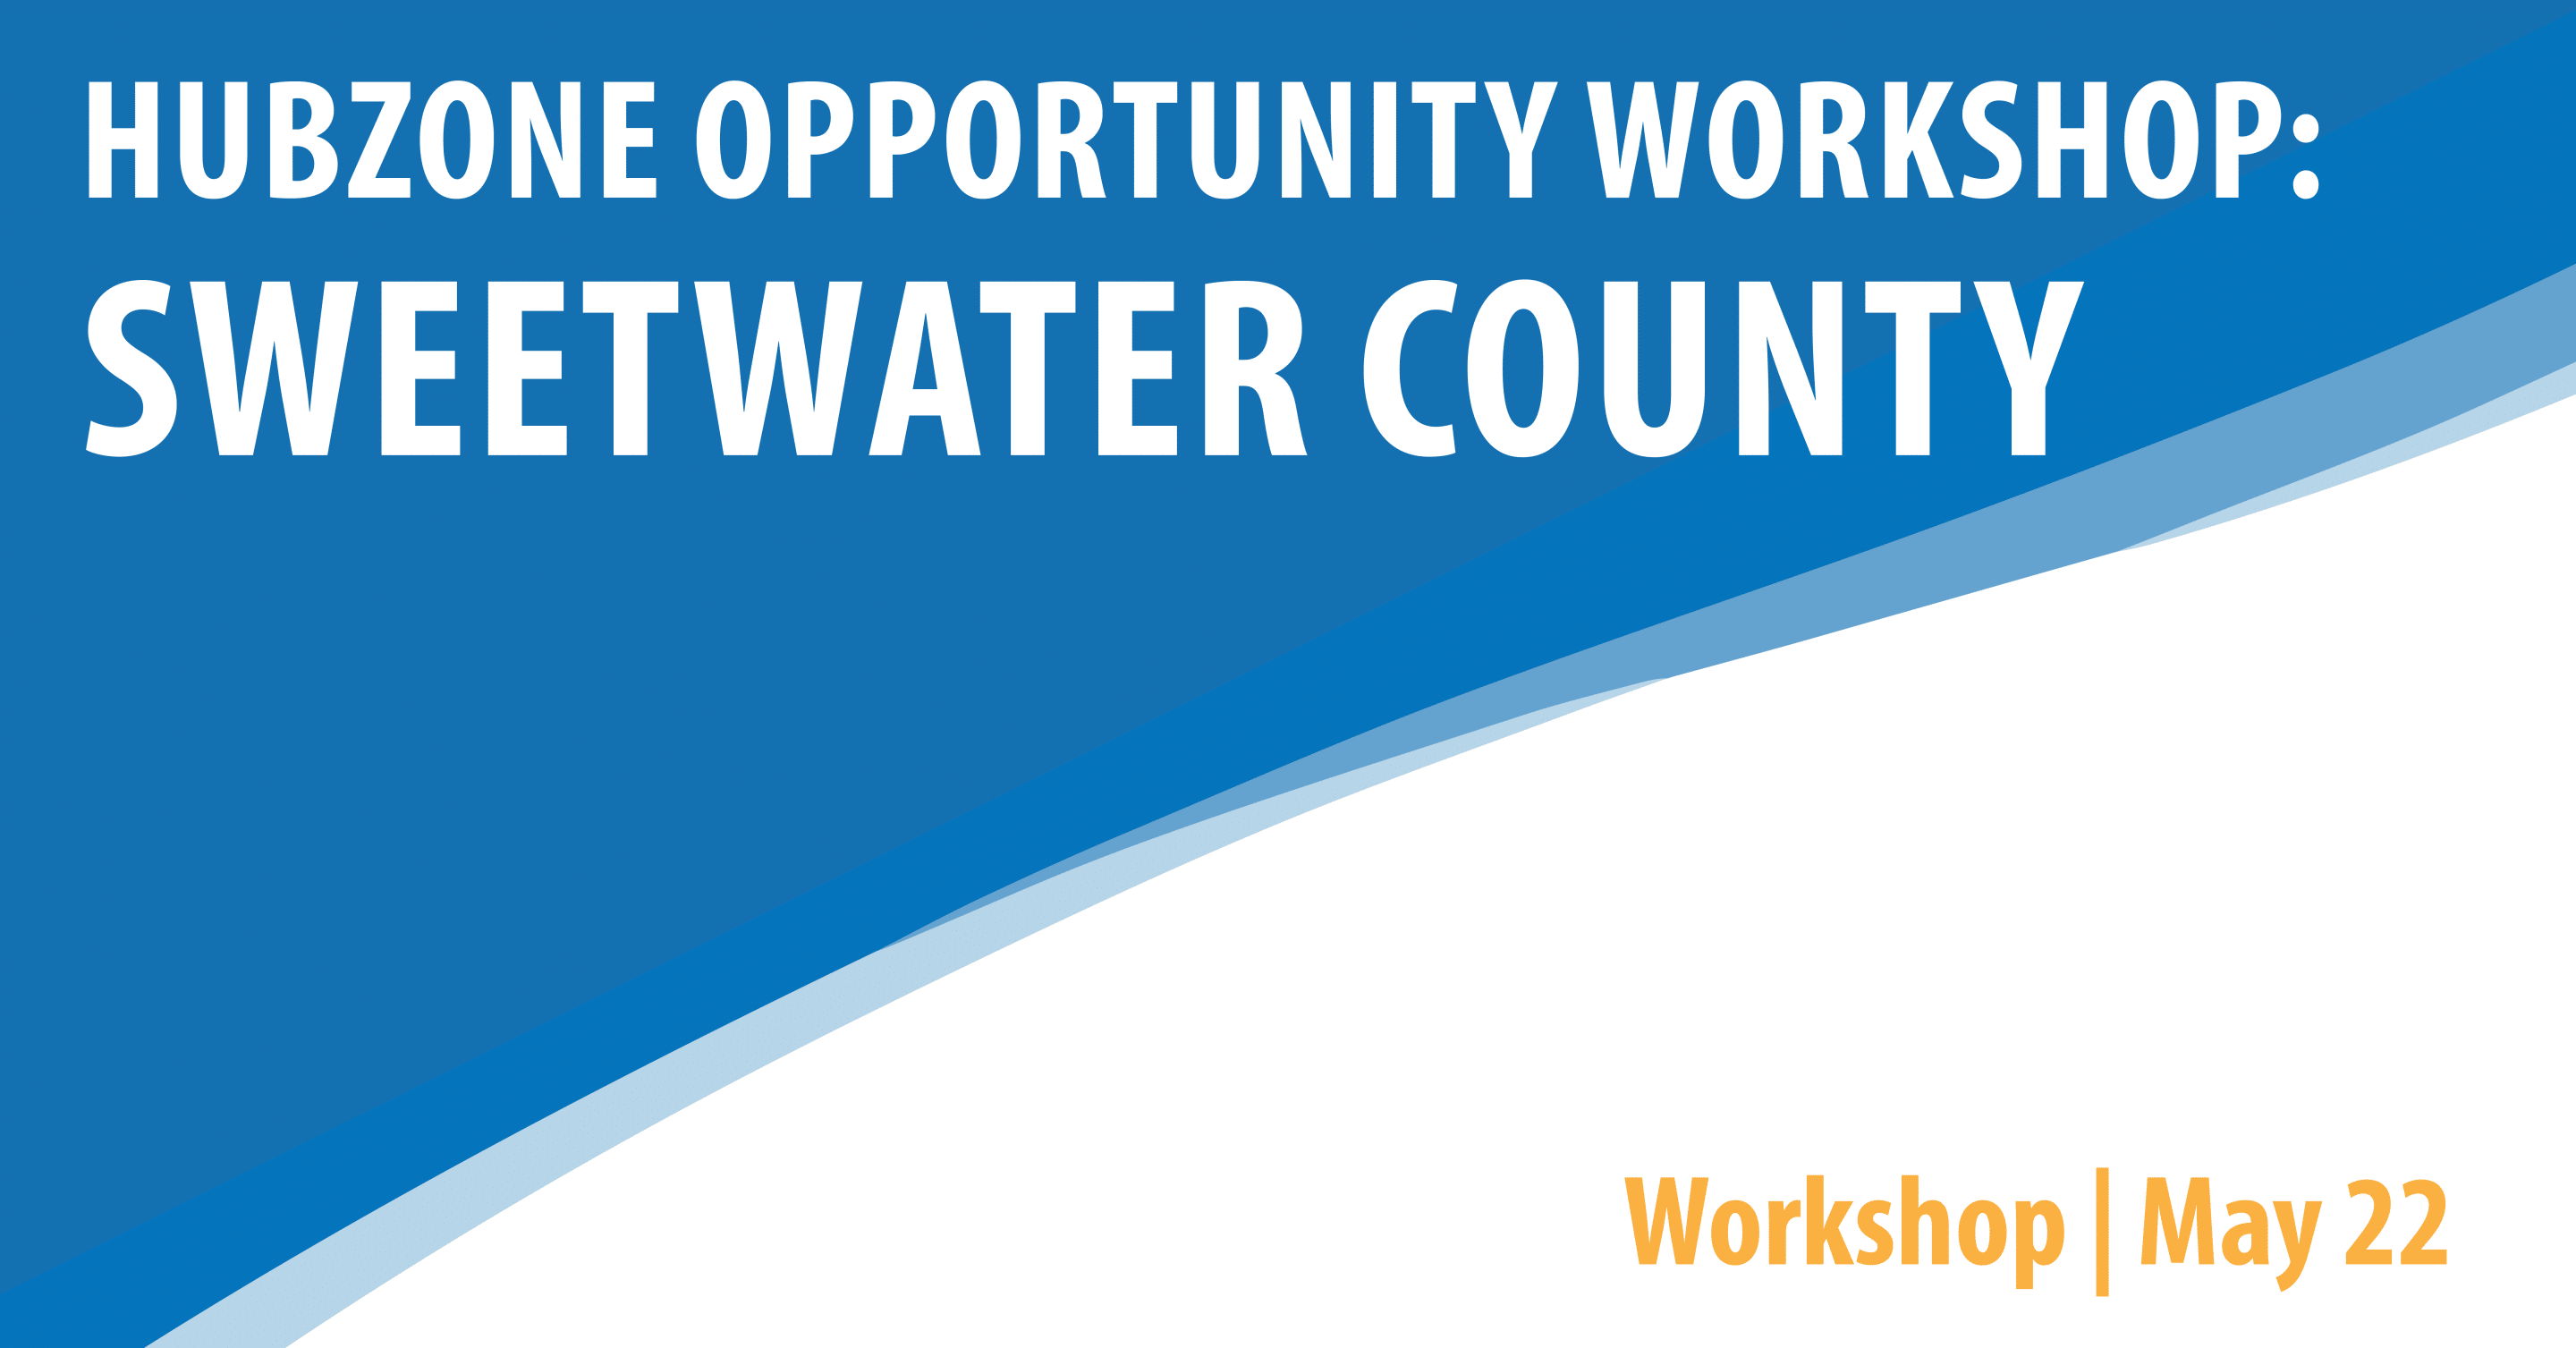 HUBZone Opportunity Workshop: Sweetwater